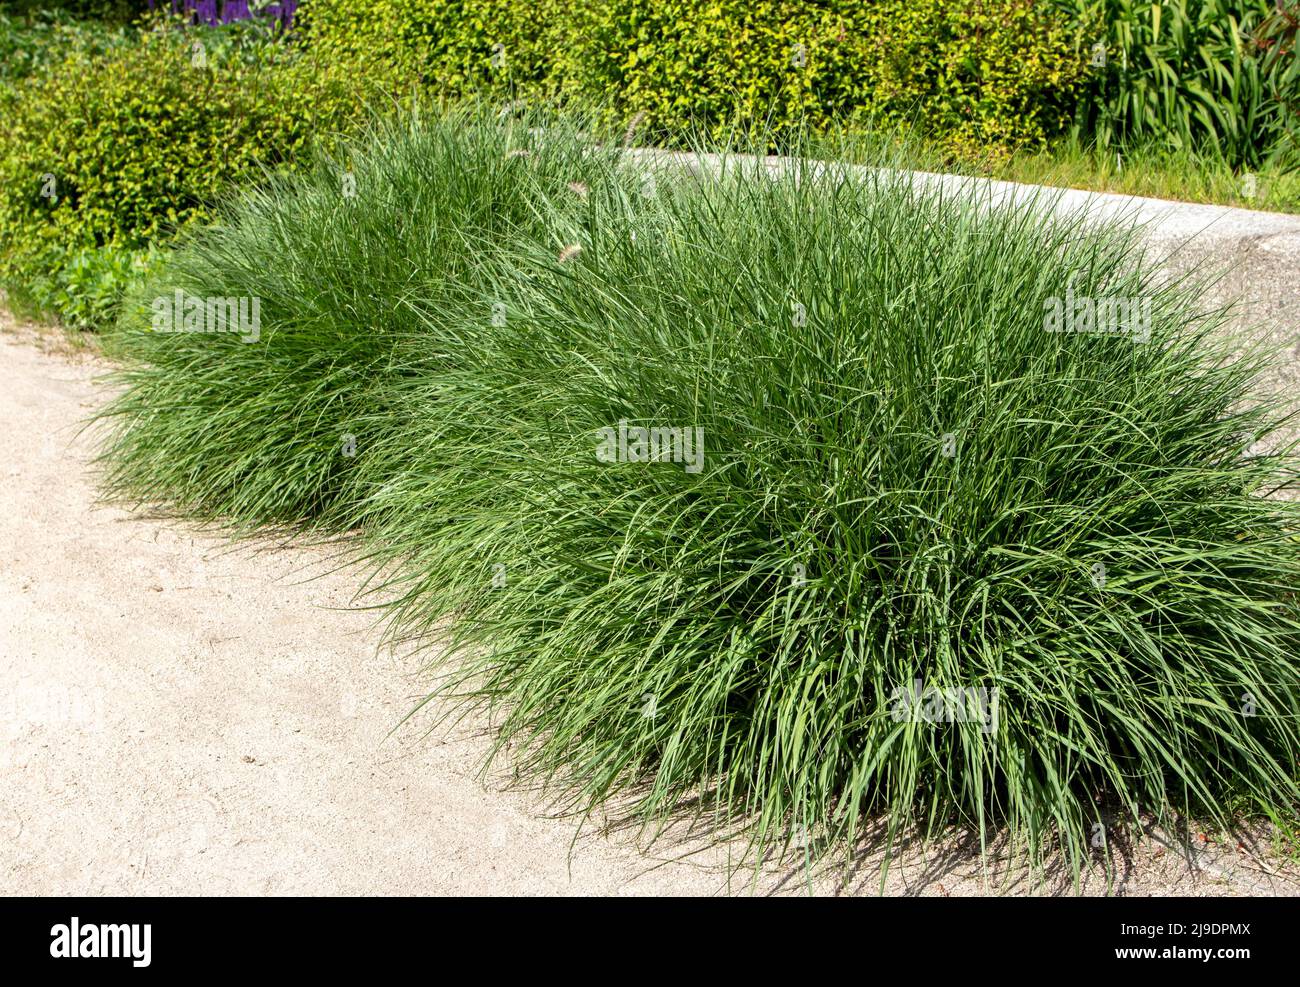 Pennisetum alopecuroides or chinese fountaingrass ornamental plant with cascading mounds of lush green foliage Stock Photo